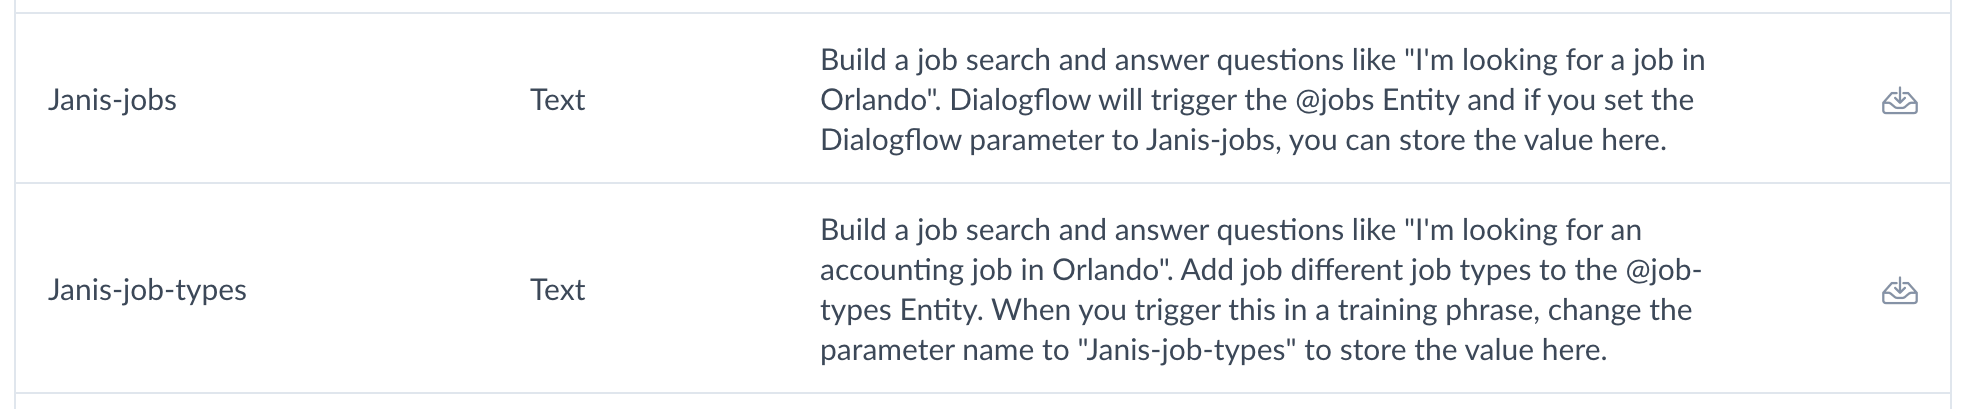 Dialogflow Entities for Manychat